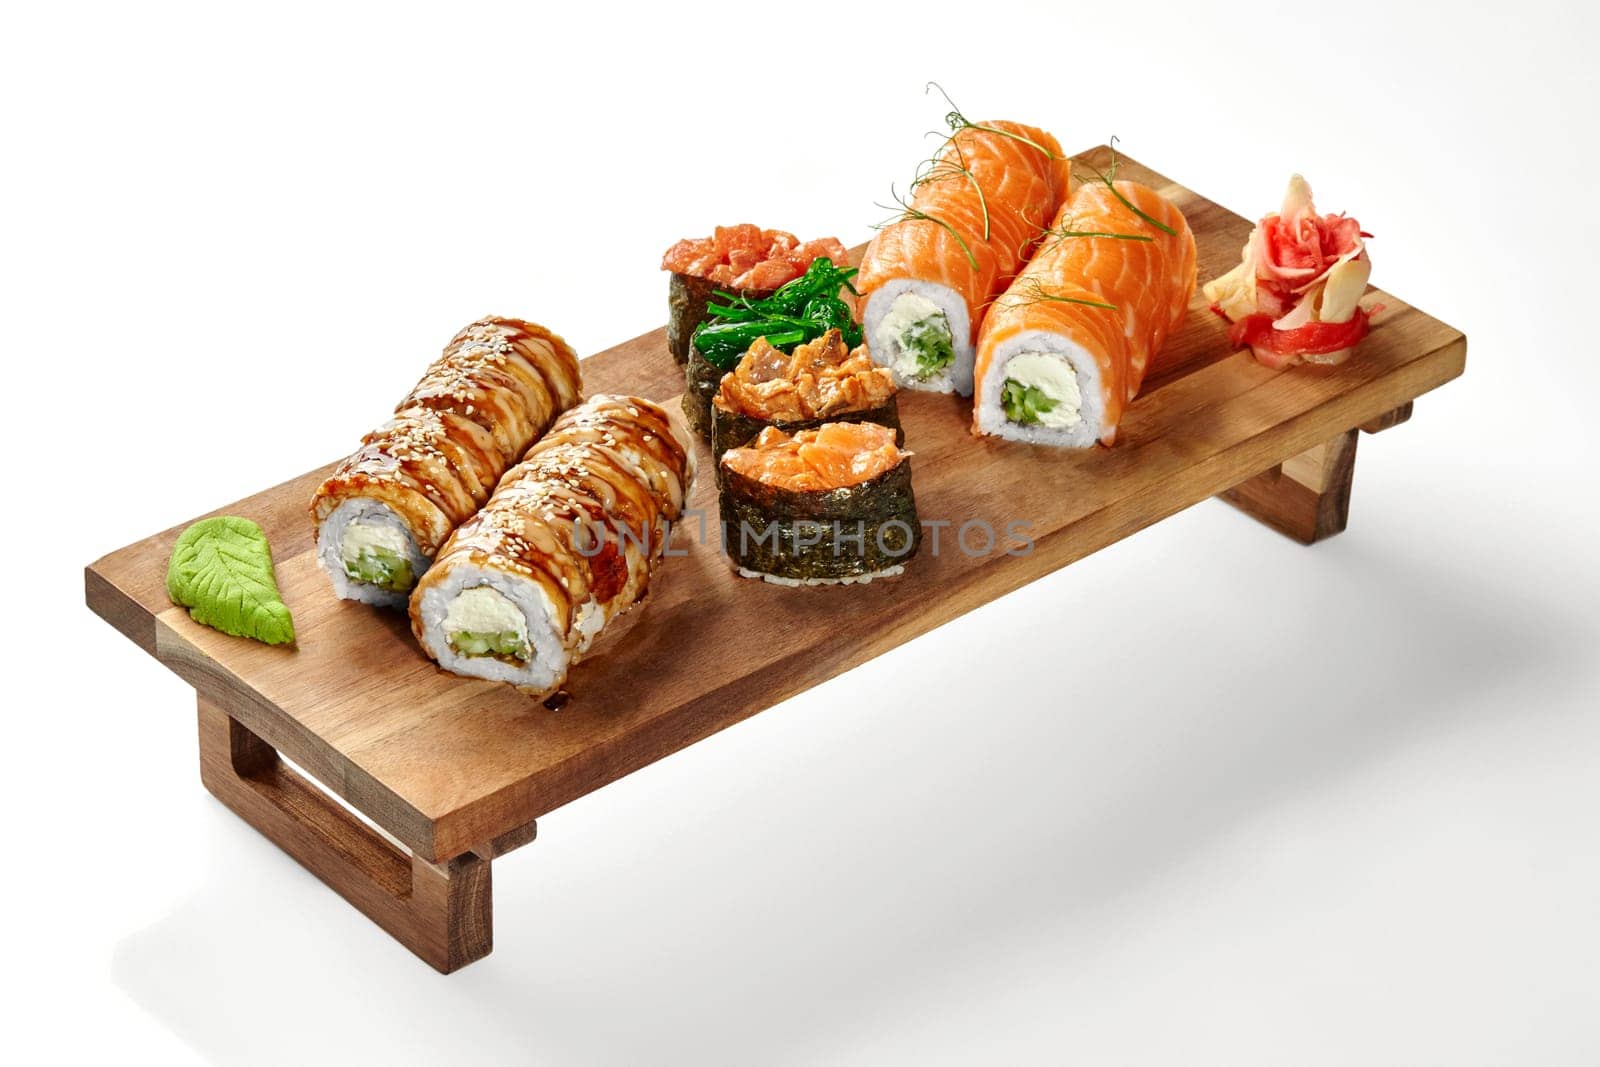 Delectable eel and salmon Philadelphia rolls and gunkan maki with various toppings served with wasabi and pickled ginger on wooden tray, isolated on white background. Japanese style lunch